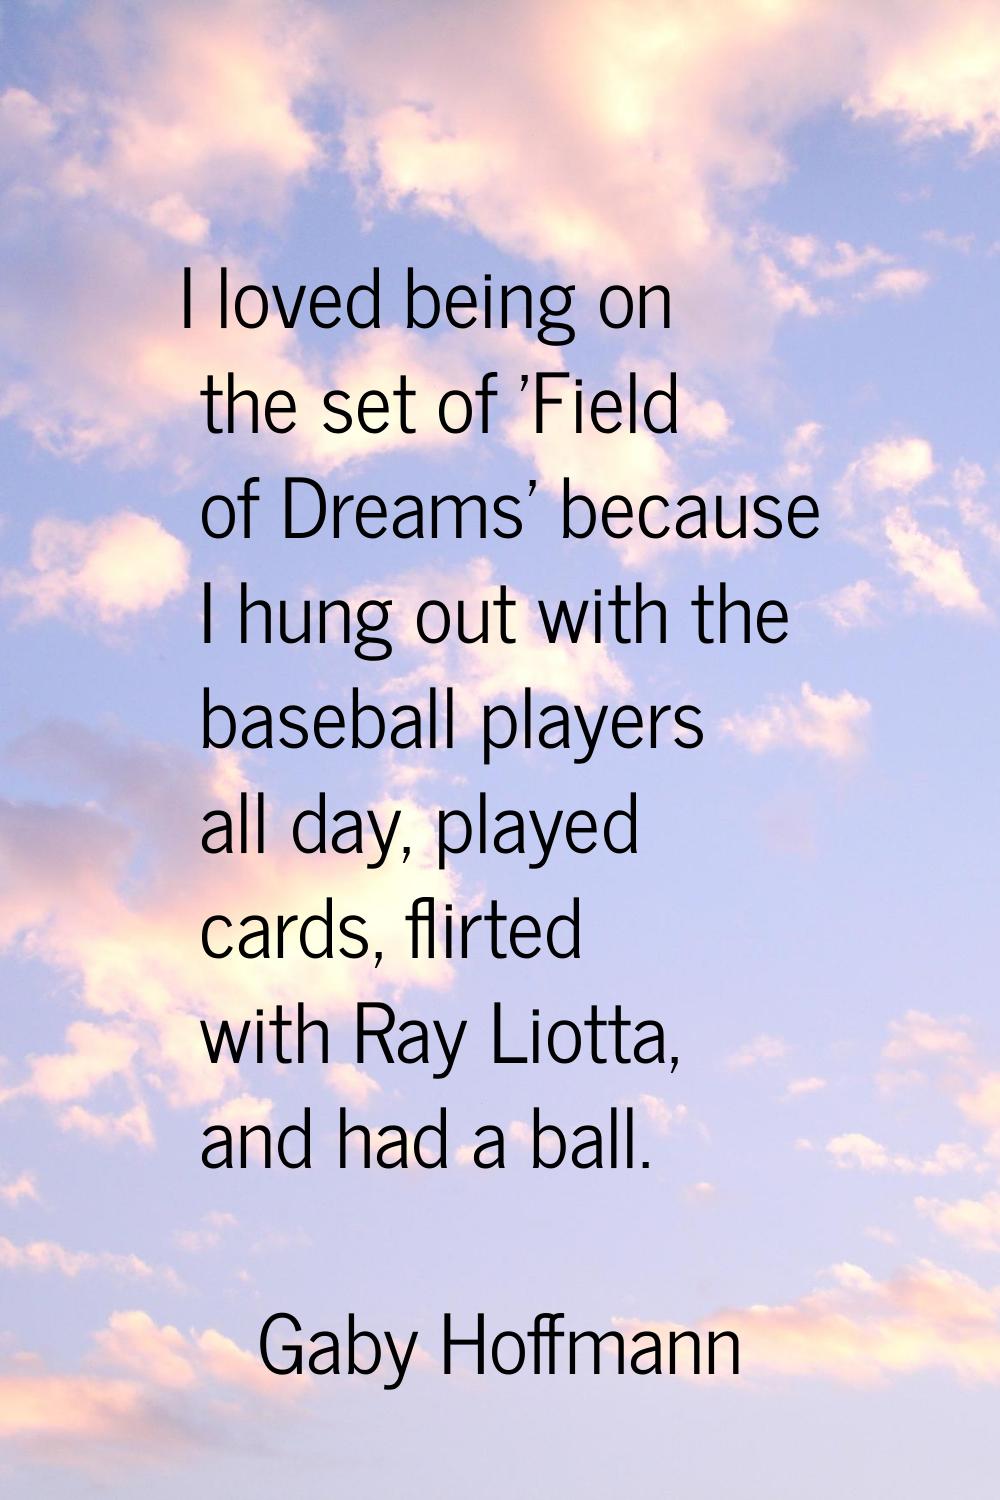 I loved being on the set of 'Field of Dreams' because I hung out with the baseball players all day,